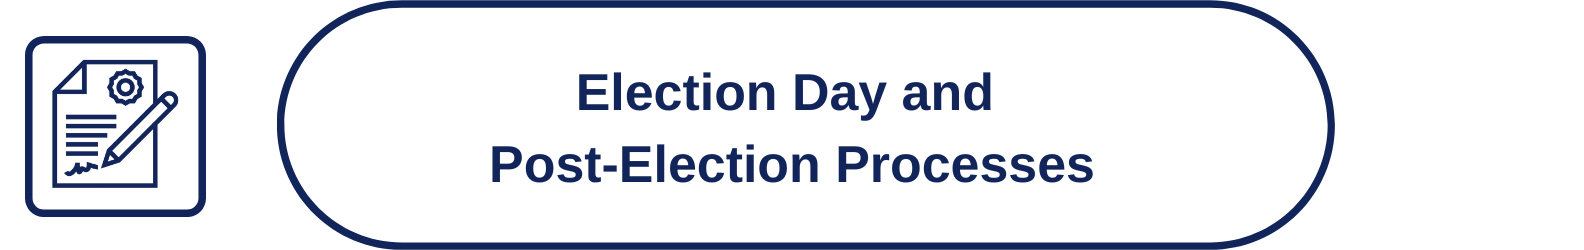 "In a navy blue box to the left is a graphic of certificate with the image of a pen signing it. In an navy oval text box the text reads Election Day and Post-Election Processes"